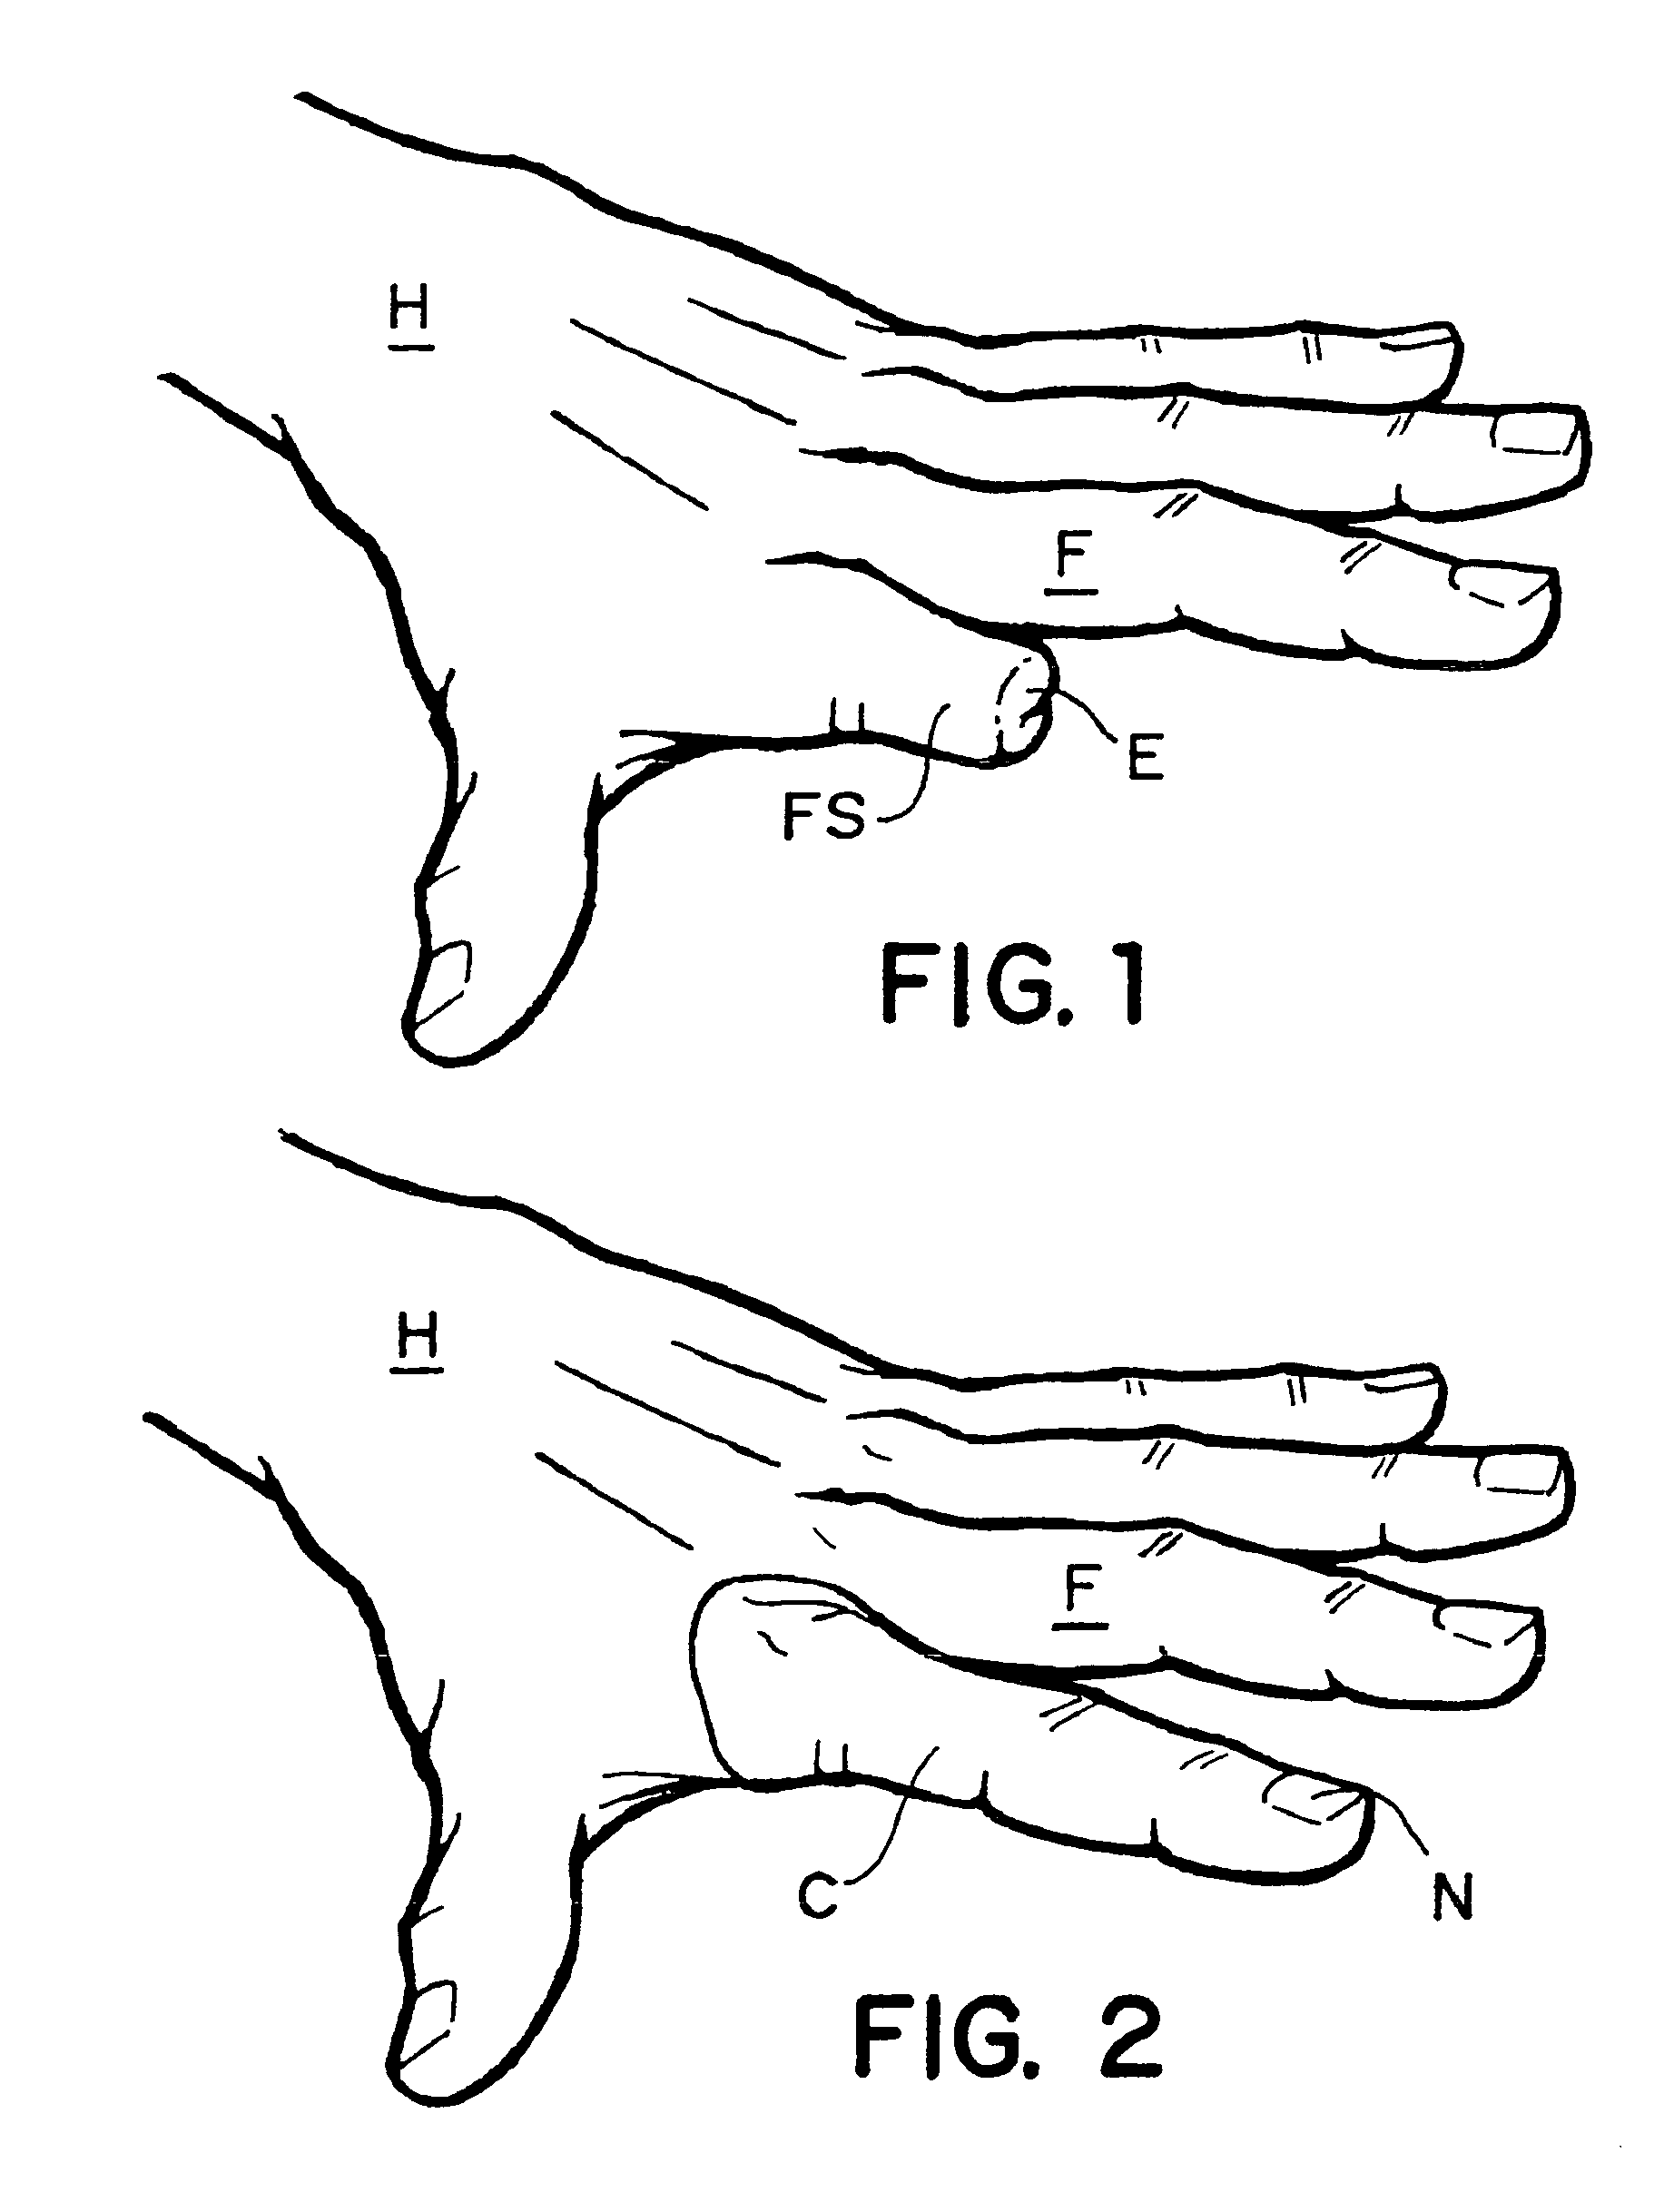 Articulated artificial finger assembly